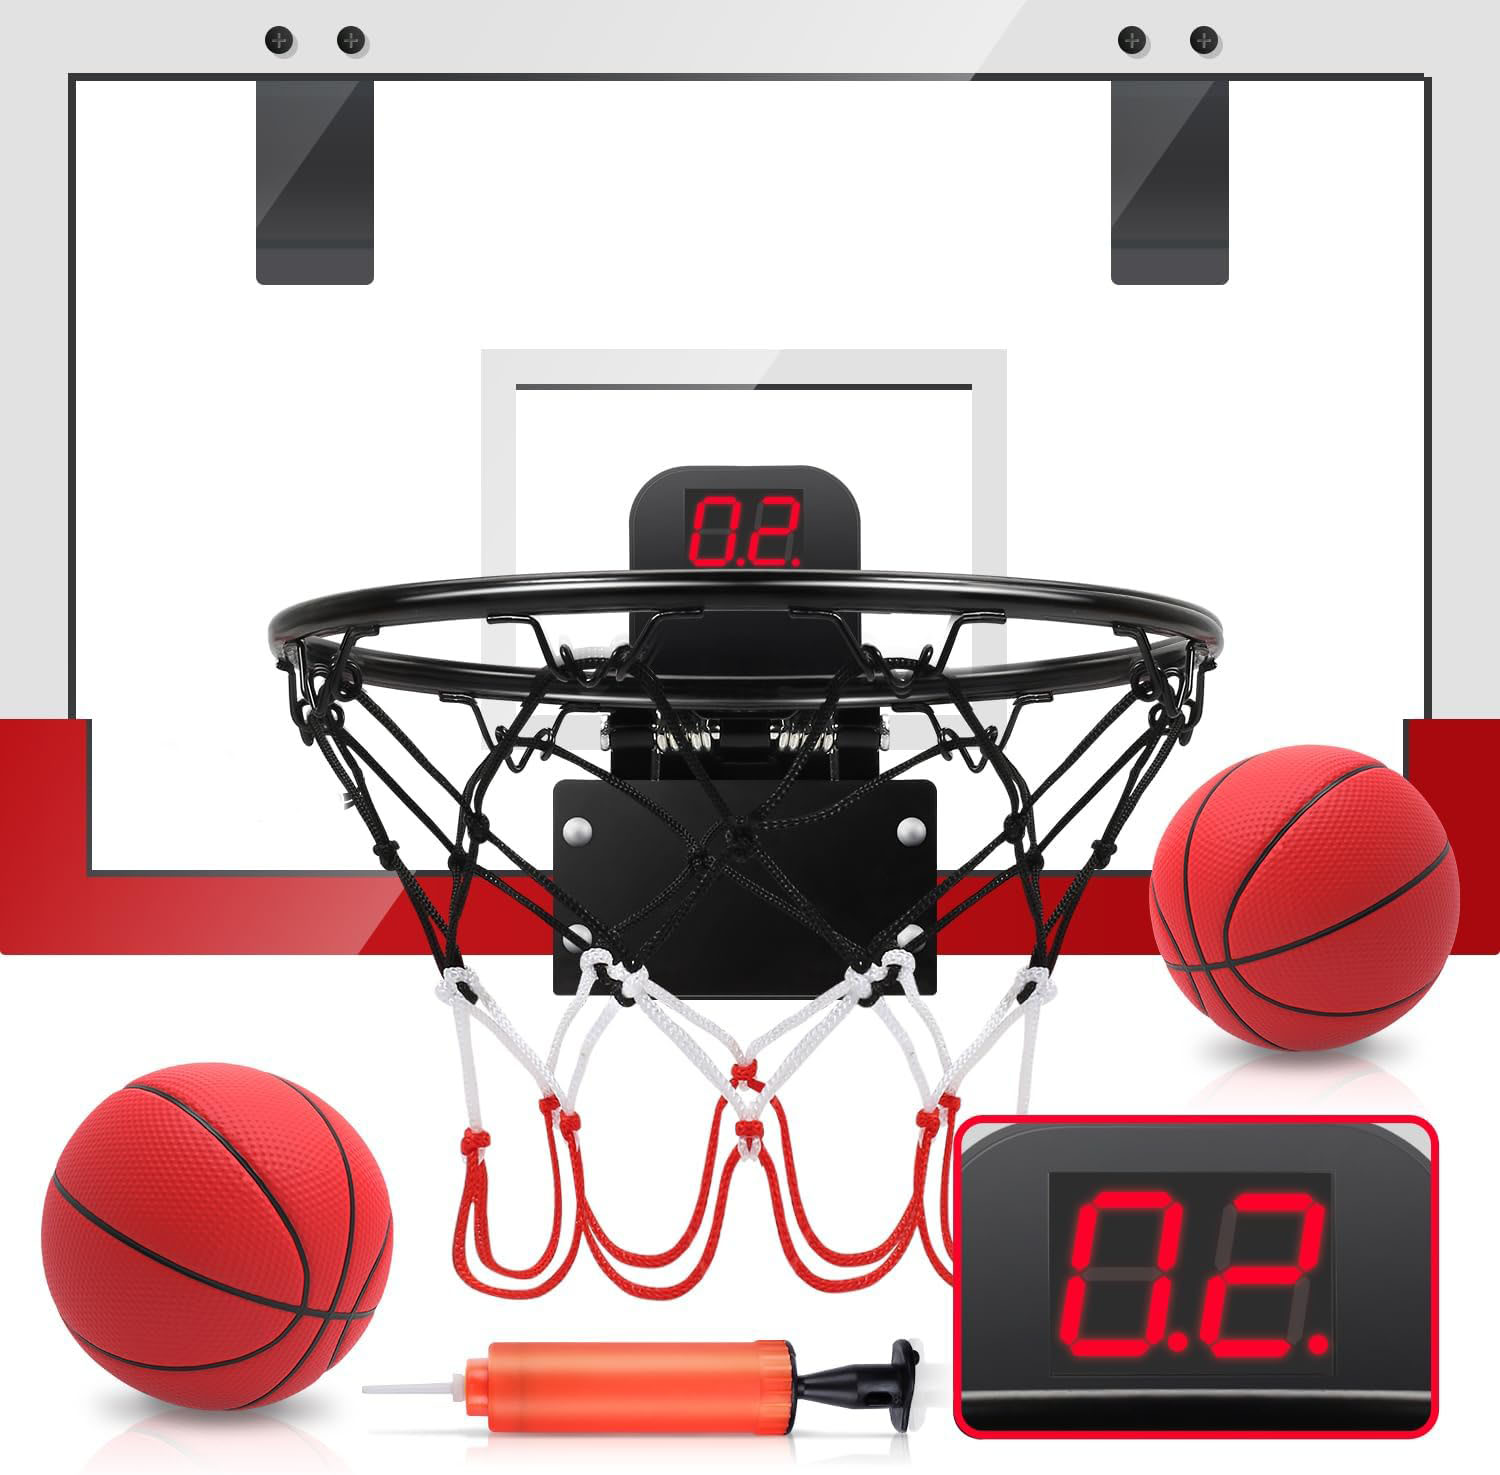 JoyStone Kids Basketball Hoop Set Electronic Score Record and Sounds, PET Basketball Hoop for Kids & Adults - image 1 of 10